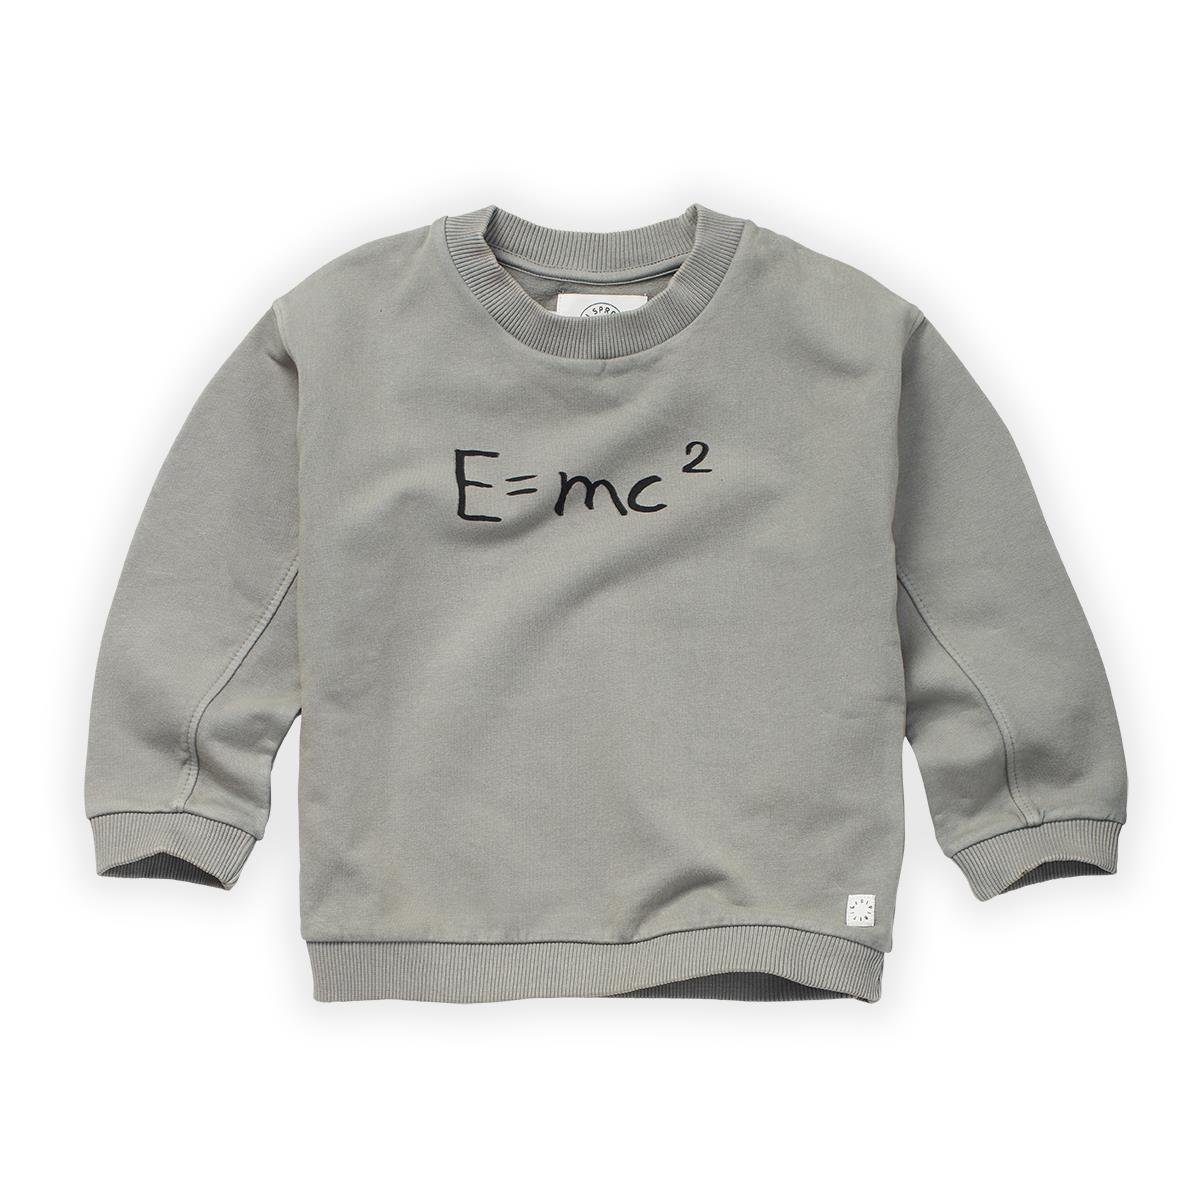 Sproet & Sprout - Sweater E=MC2